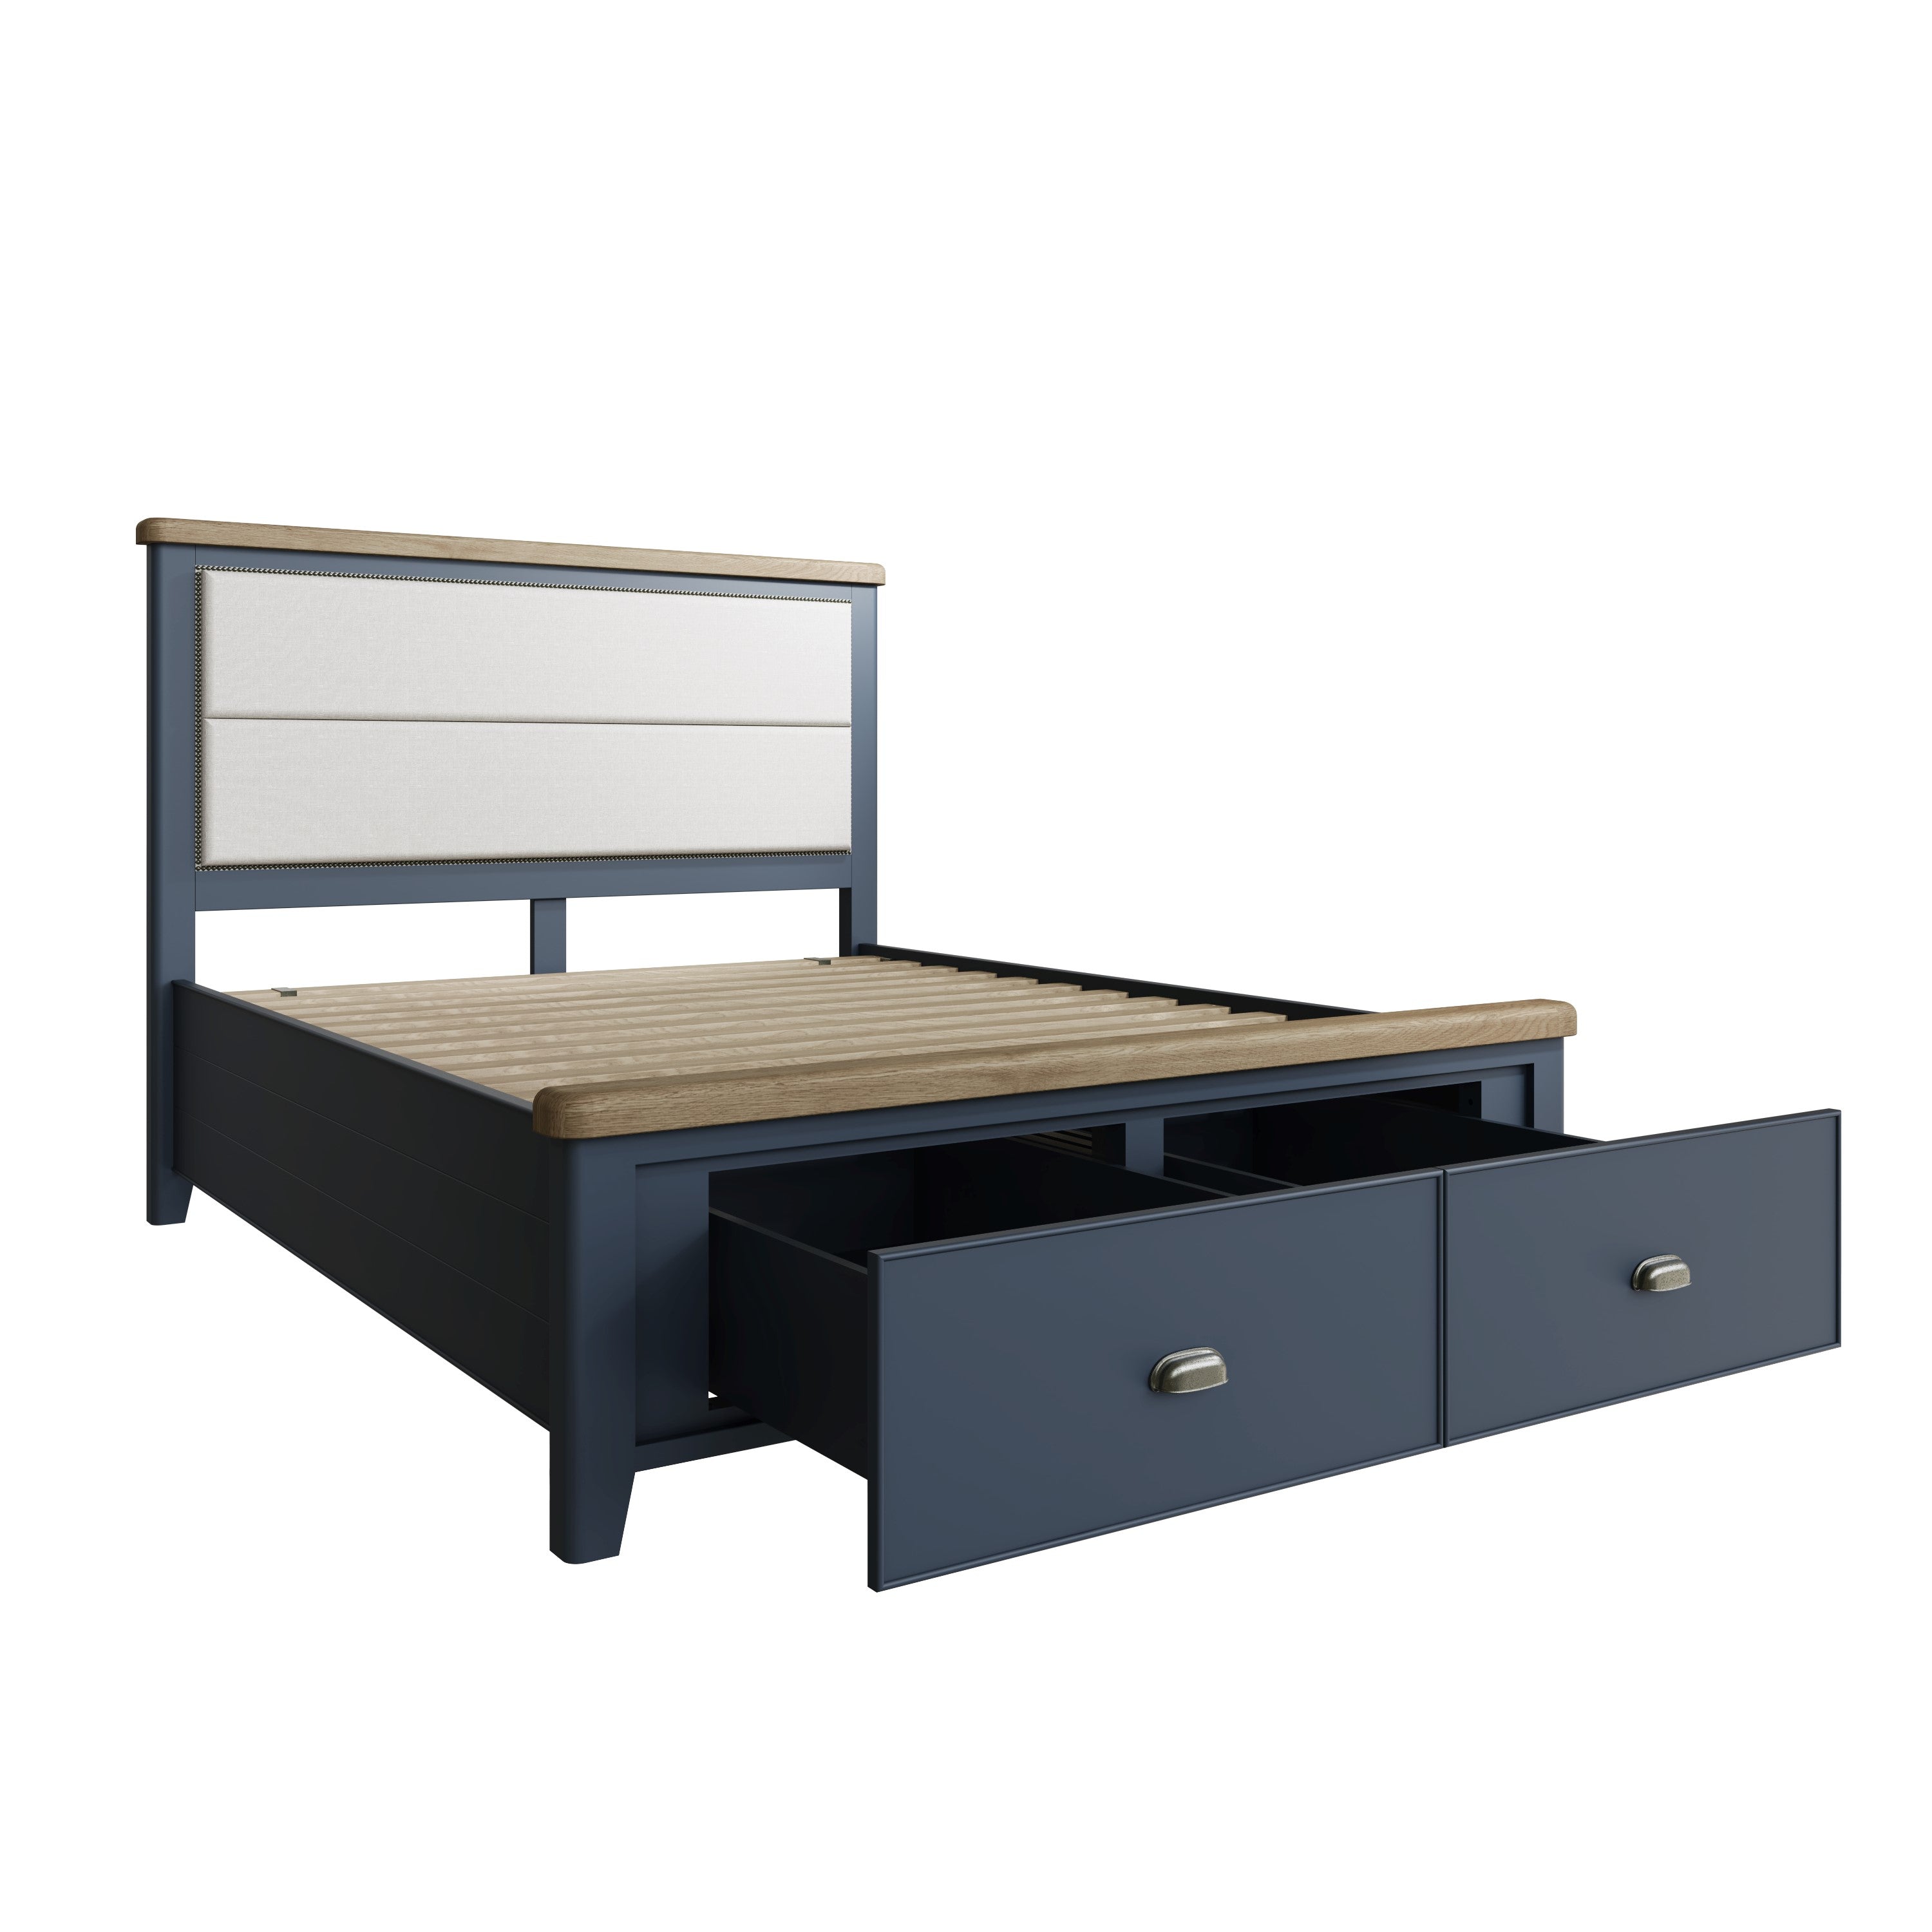 Rogate Blue 4'6" Double Bed Frame - Fabric Headboard & Drawers